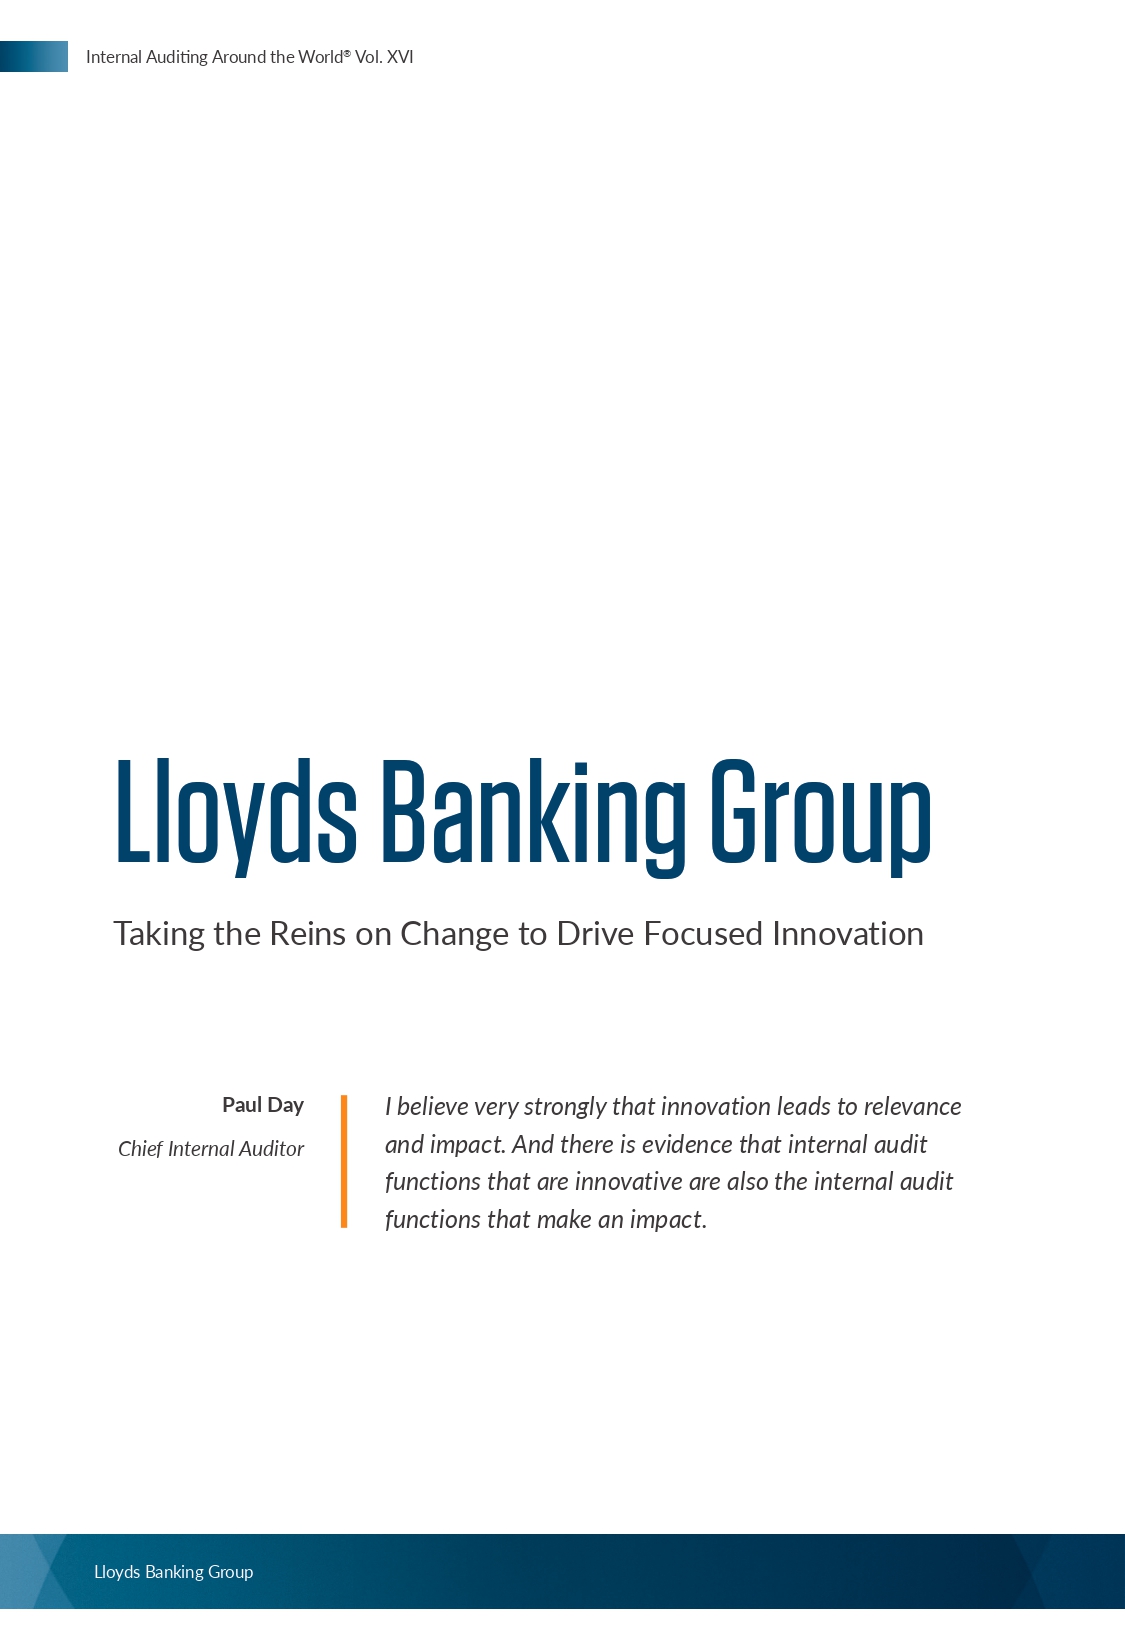 Screenshot of Lloyds Banking Group: Taking the Reins on Change to Drive Focused Innovation